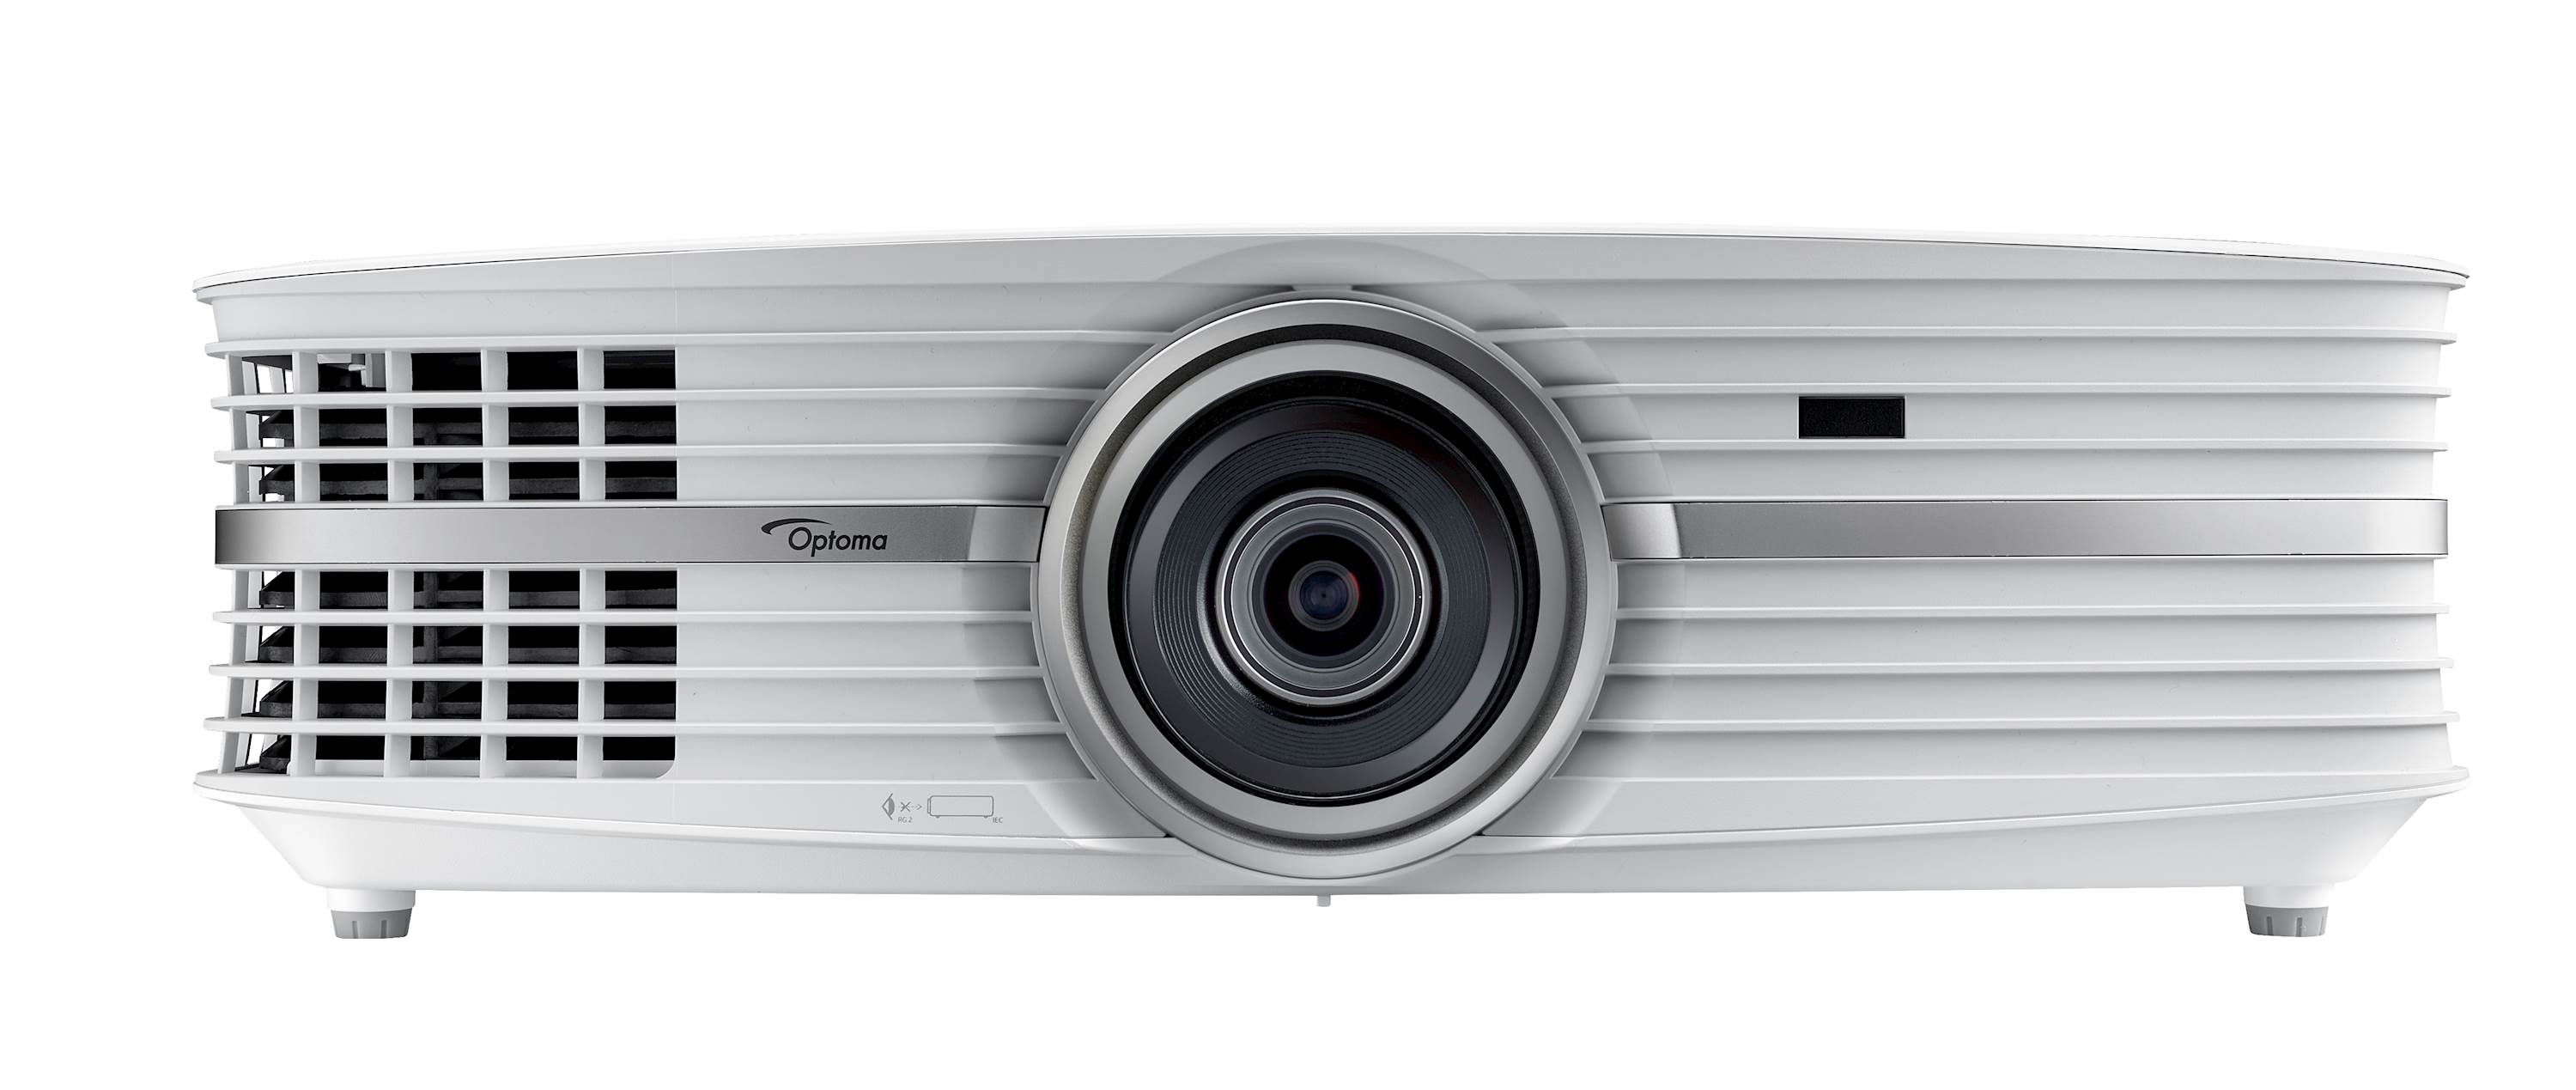 Optoma dlp projector driver for windows 10